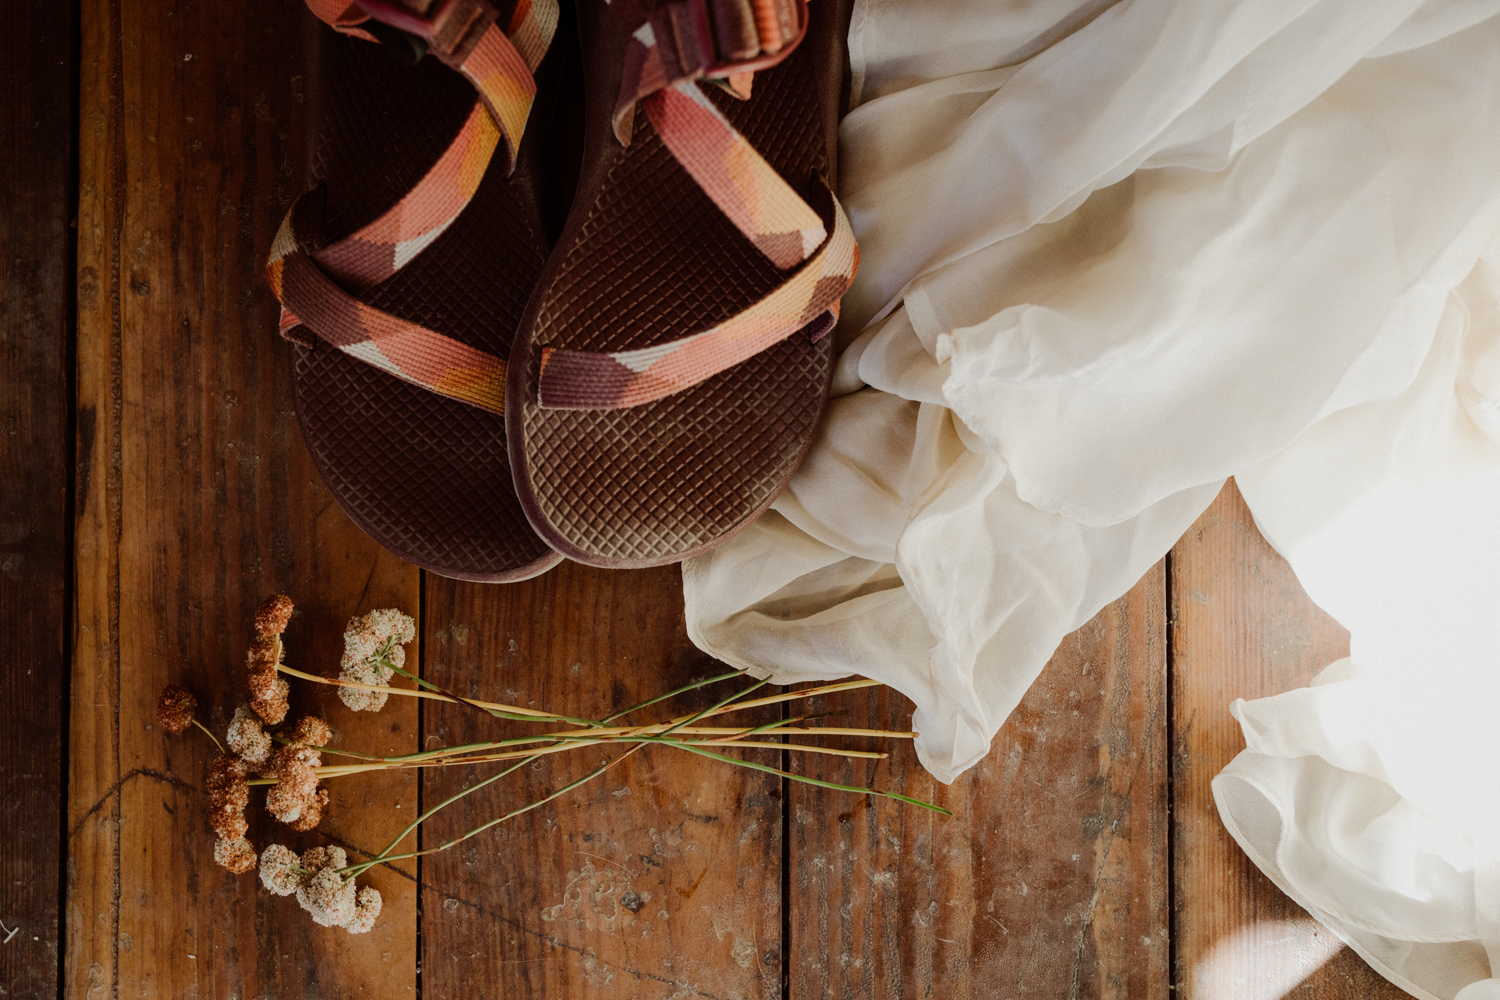 Chacos bridal shoes